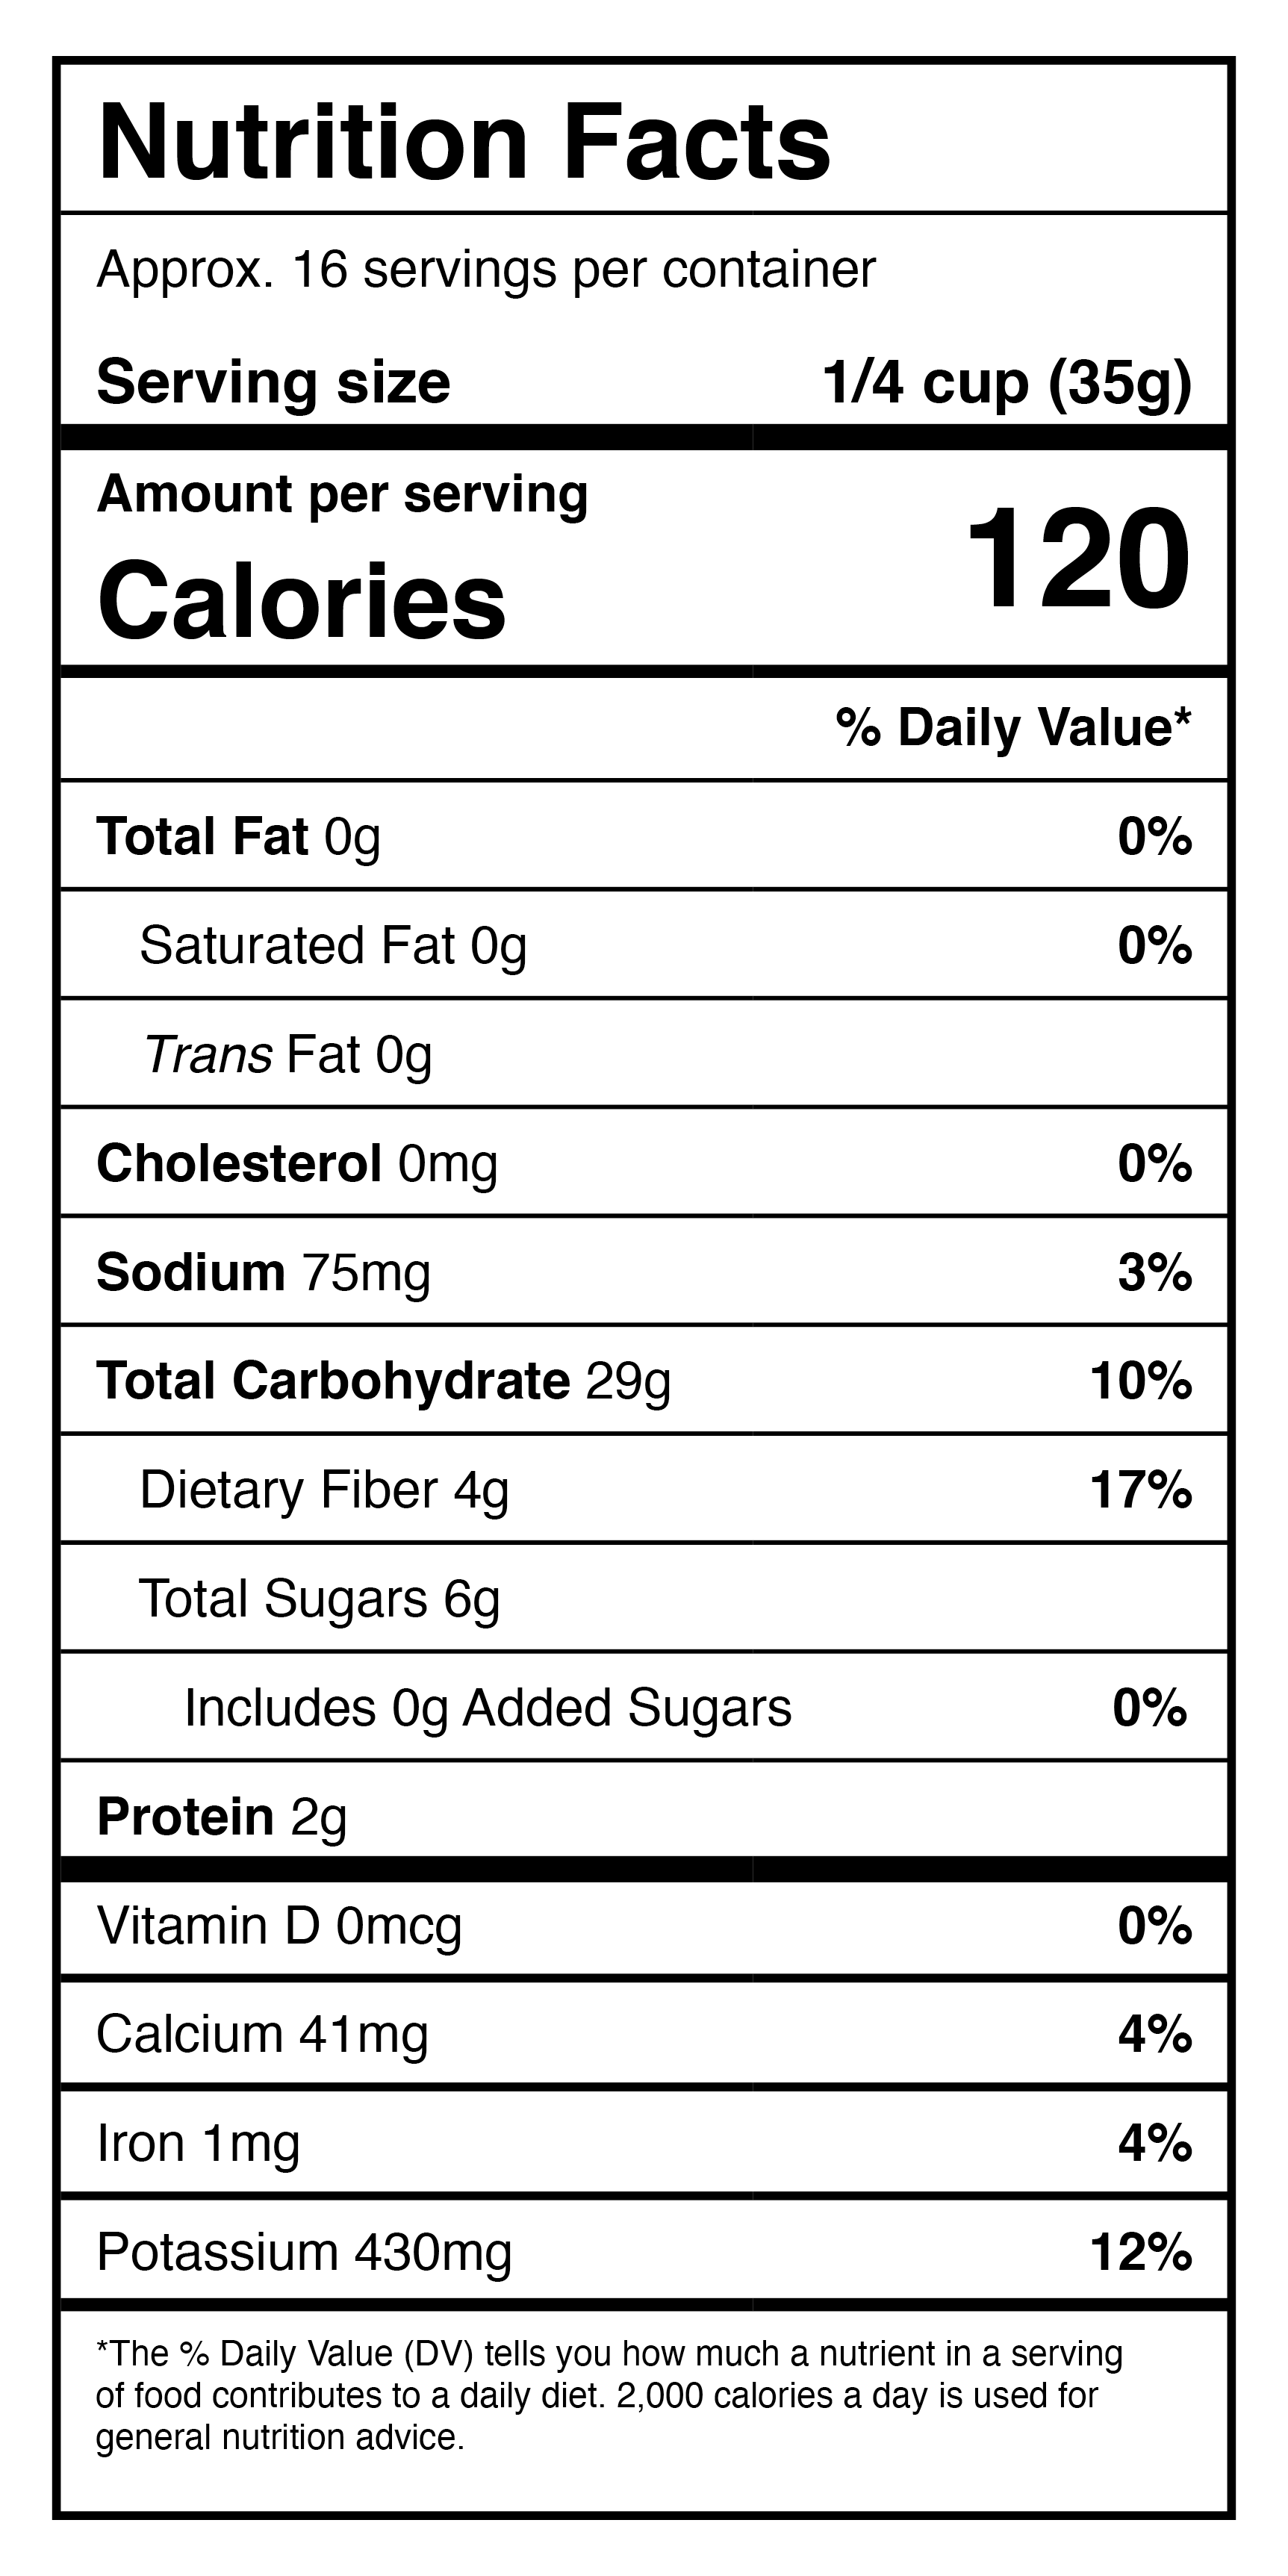 A nutrition label showing the nutrition facts of Harmony House Organic Dried Sweet Potatoes.